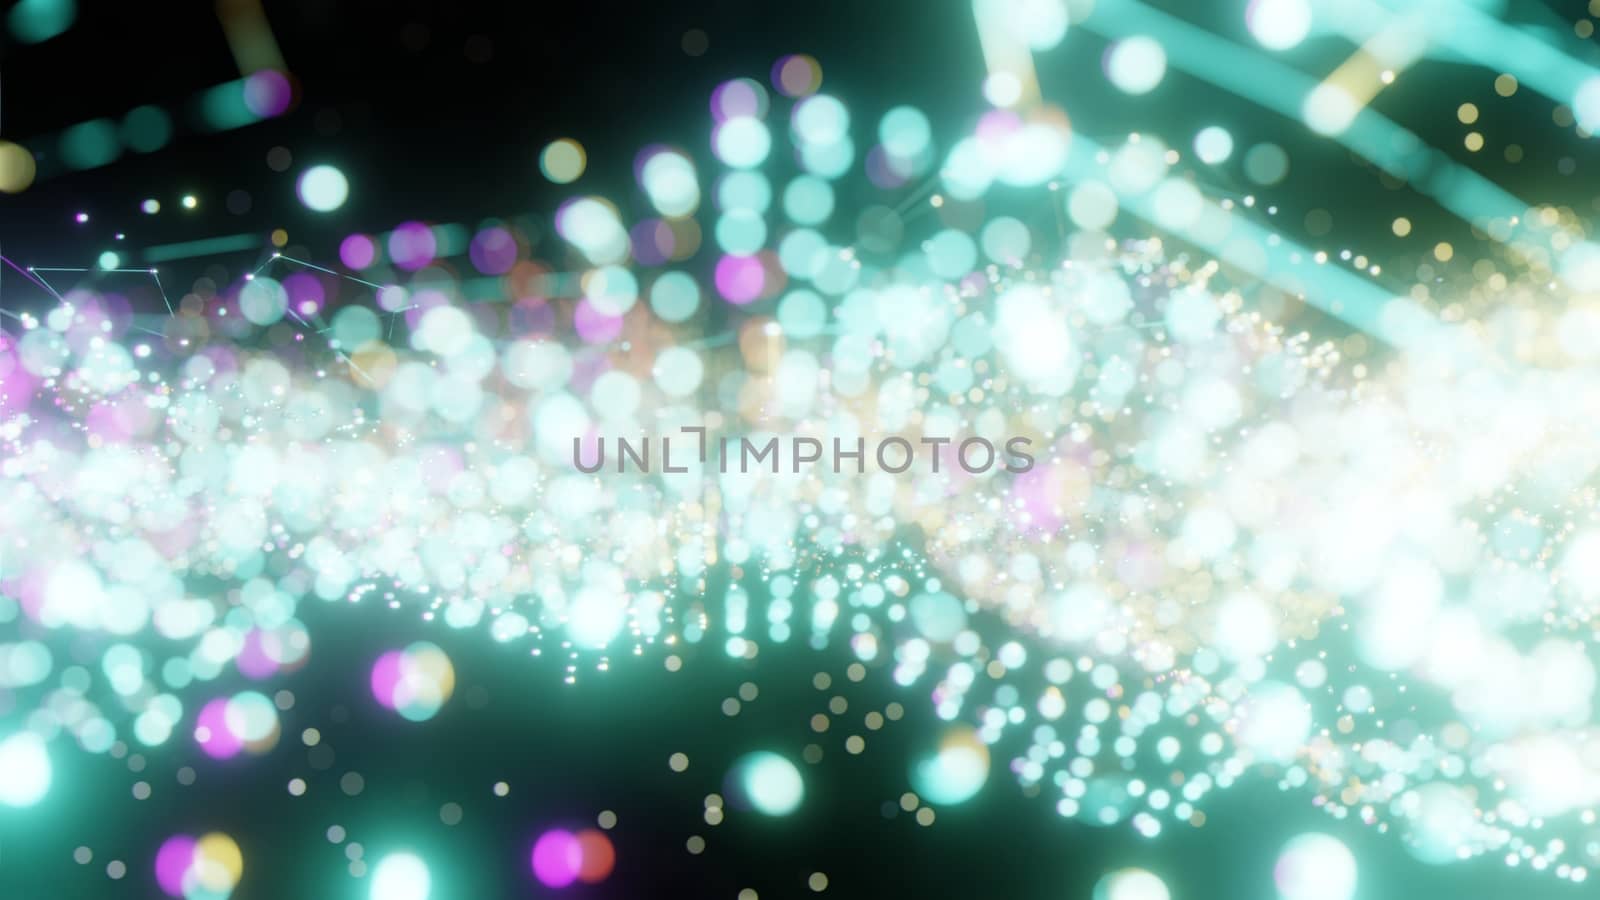 Plexus of abstract green dots on a black background. Loop animations. 3D illustration